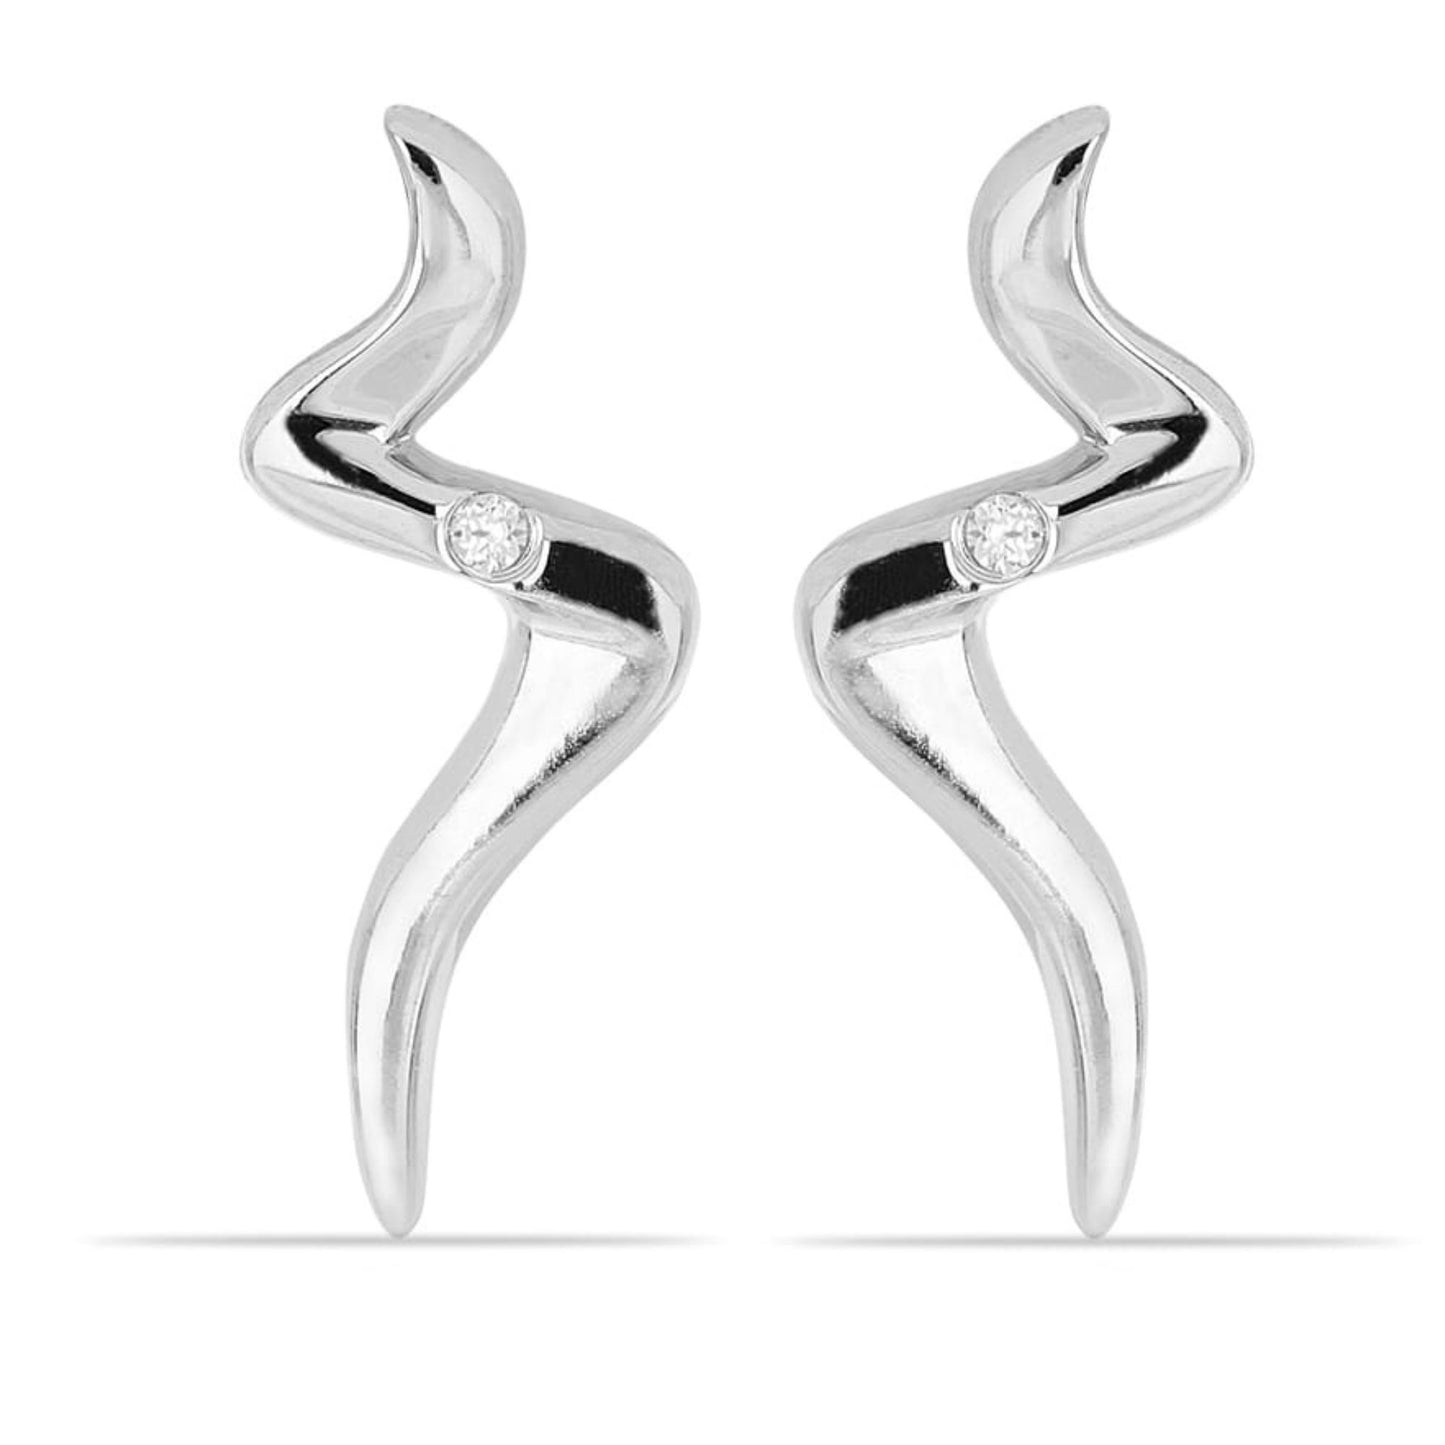 SPARKLING CURVE EARRINGS - STERLING SILVER